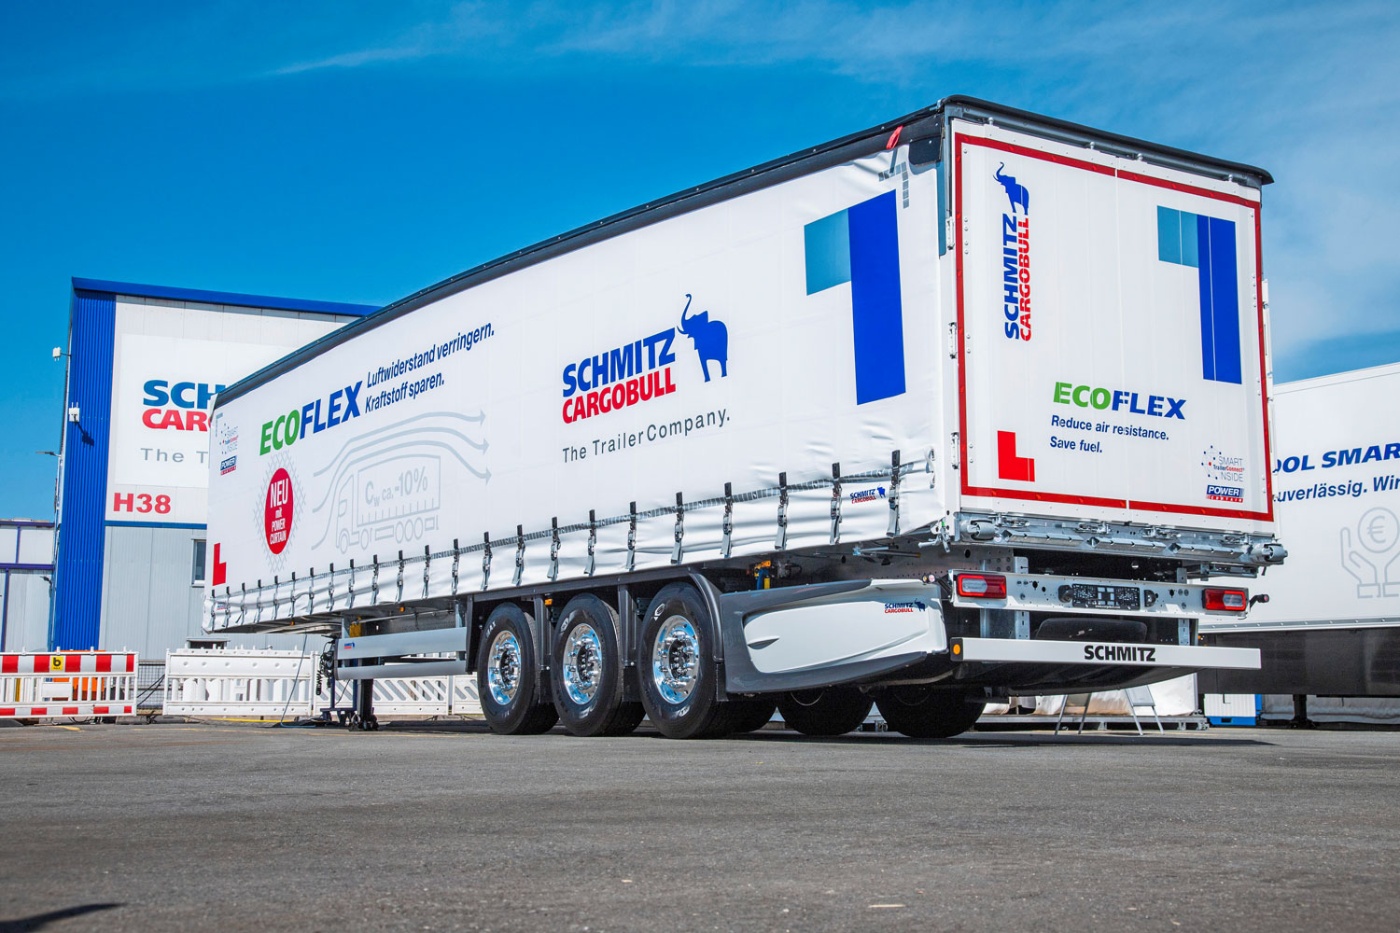 Curtain sider S.CS EcoFLEX was aerodynamically optimized, thereby reducing fuel consumption and CO2 emissions. Photo: Schmitz Cargobull